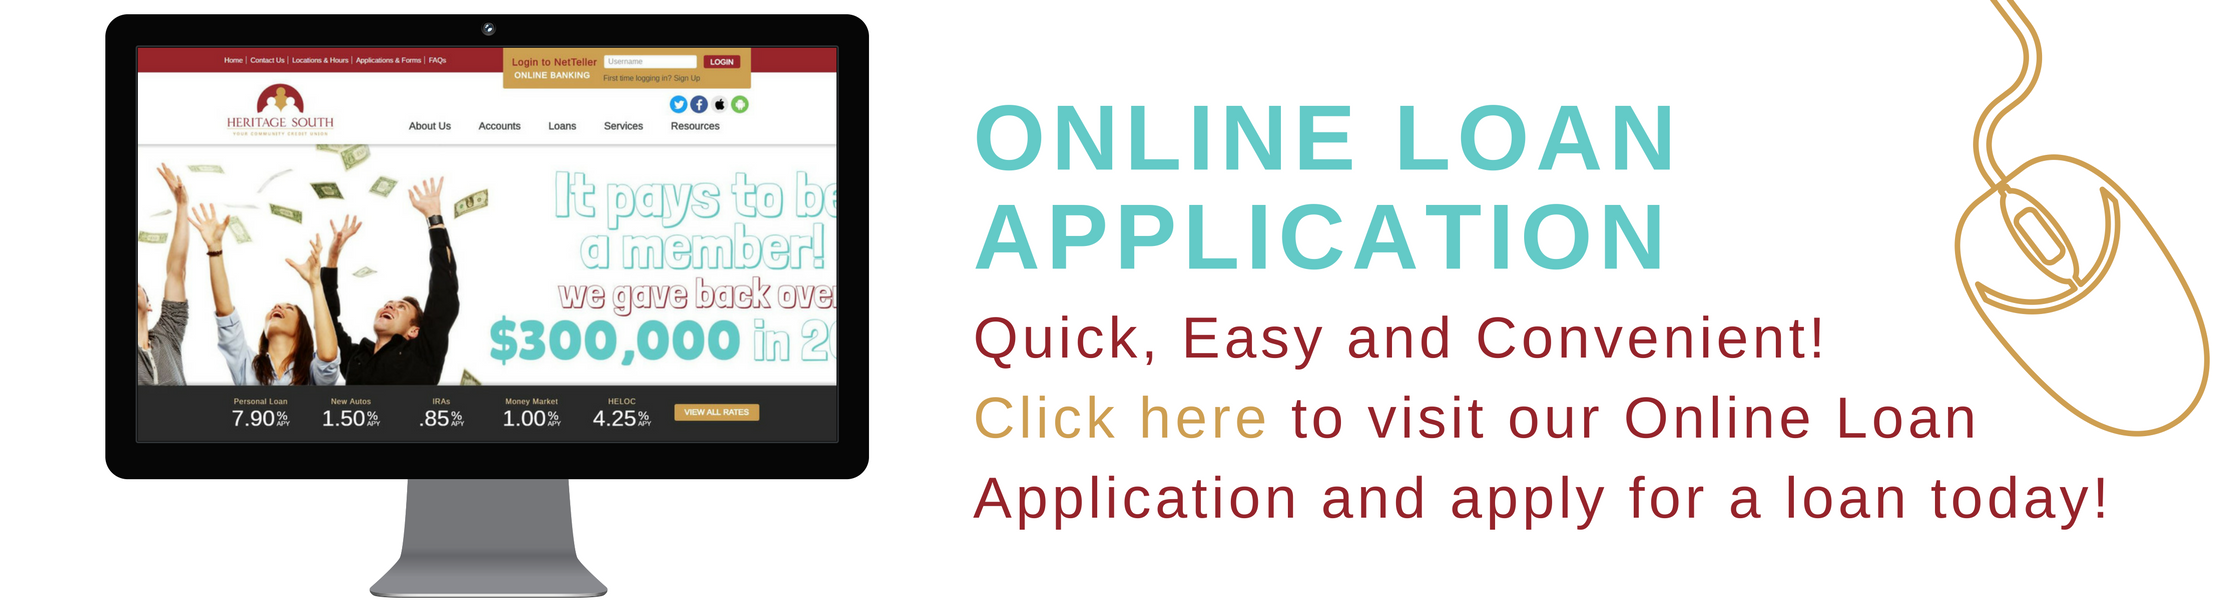 Online loan application. Quick, Easy and convenient. Click here to visit our Online loan application and apply for a loan today.